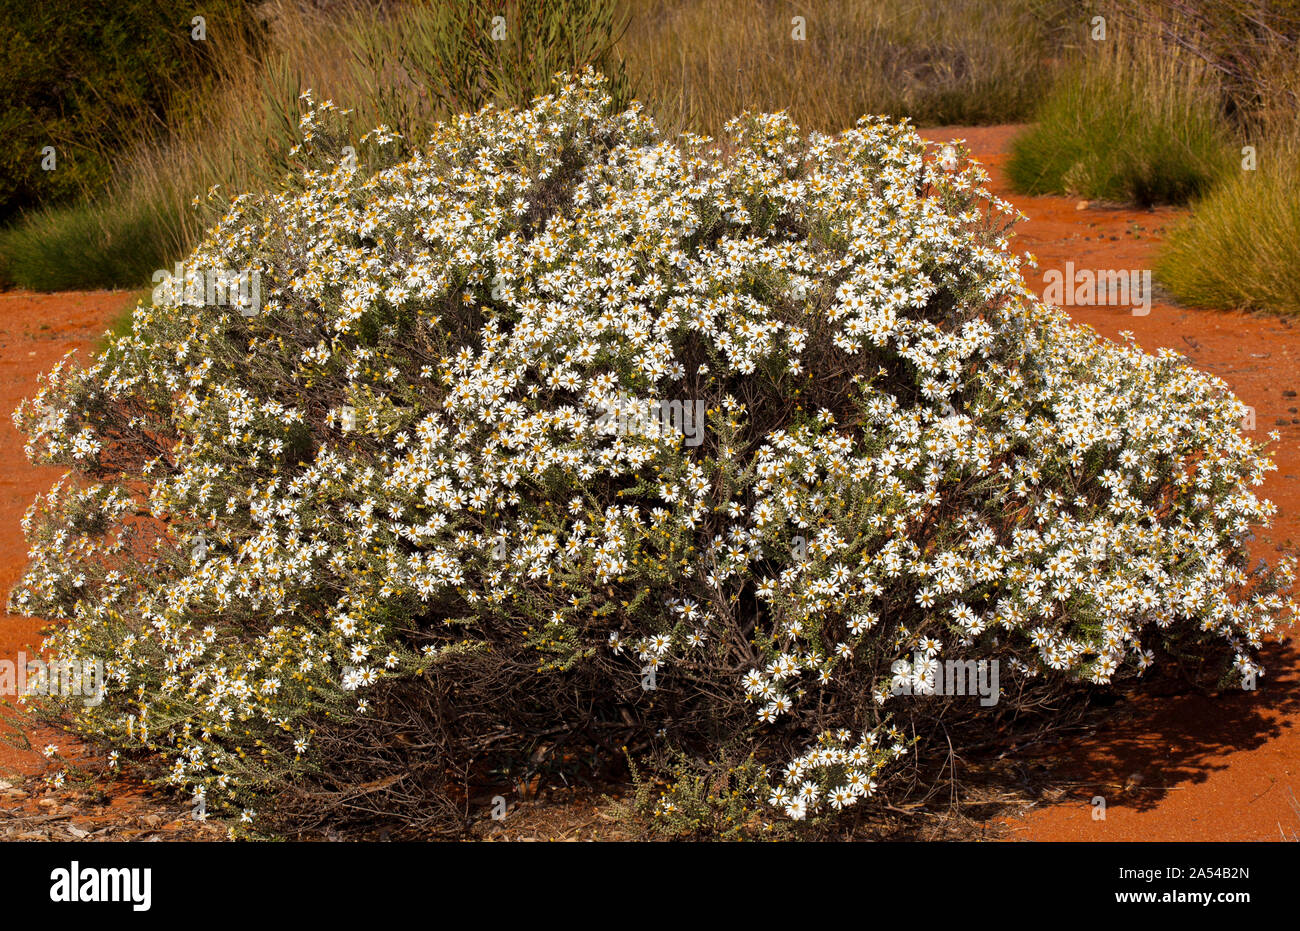 Australian native shrub, Olearia pimelioides, Showy Daisy Bush, covered with mass of white flowers against red soil of arid landscape, South Australia Stock Photo